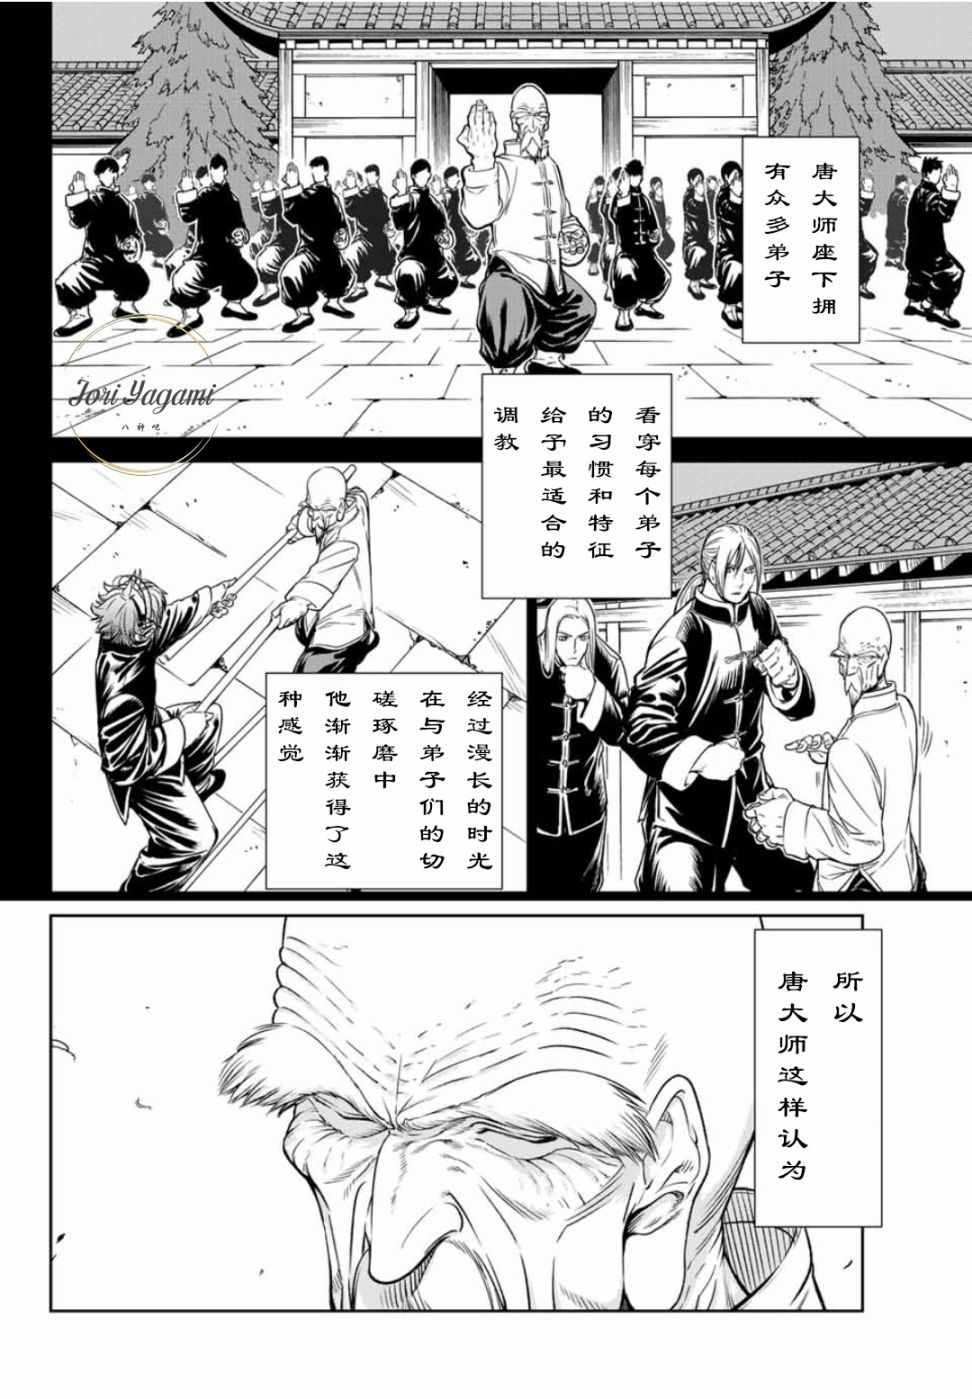 《THE KING OF FIGHTERS～A NEW BEGINNING～》漫画 ANEWBEGINNING 025话